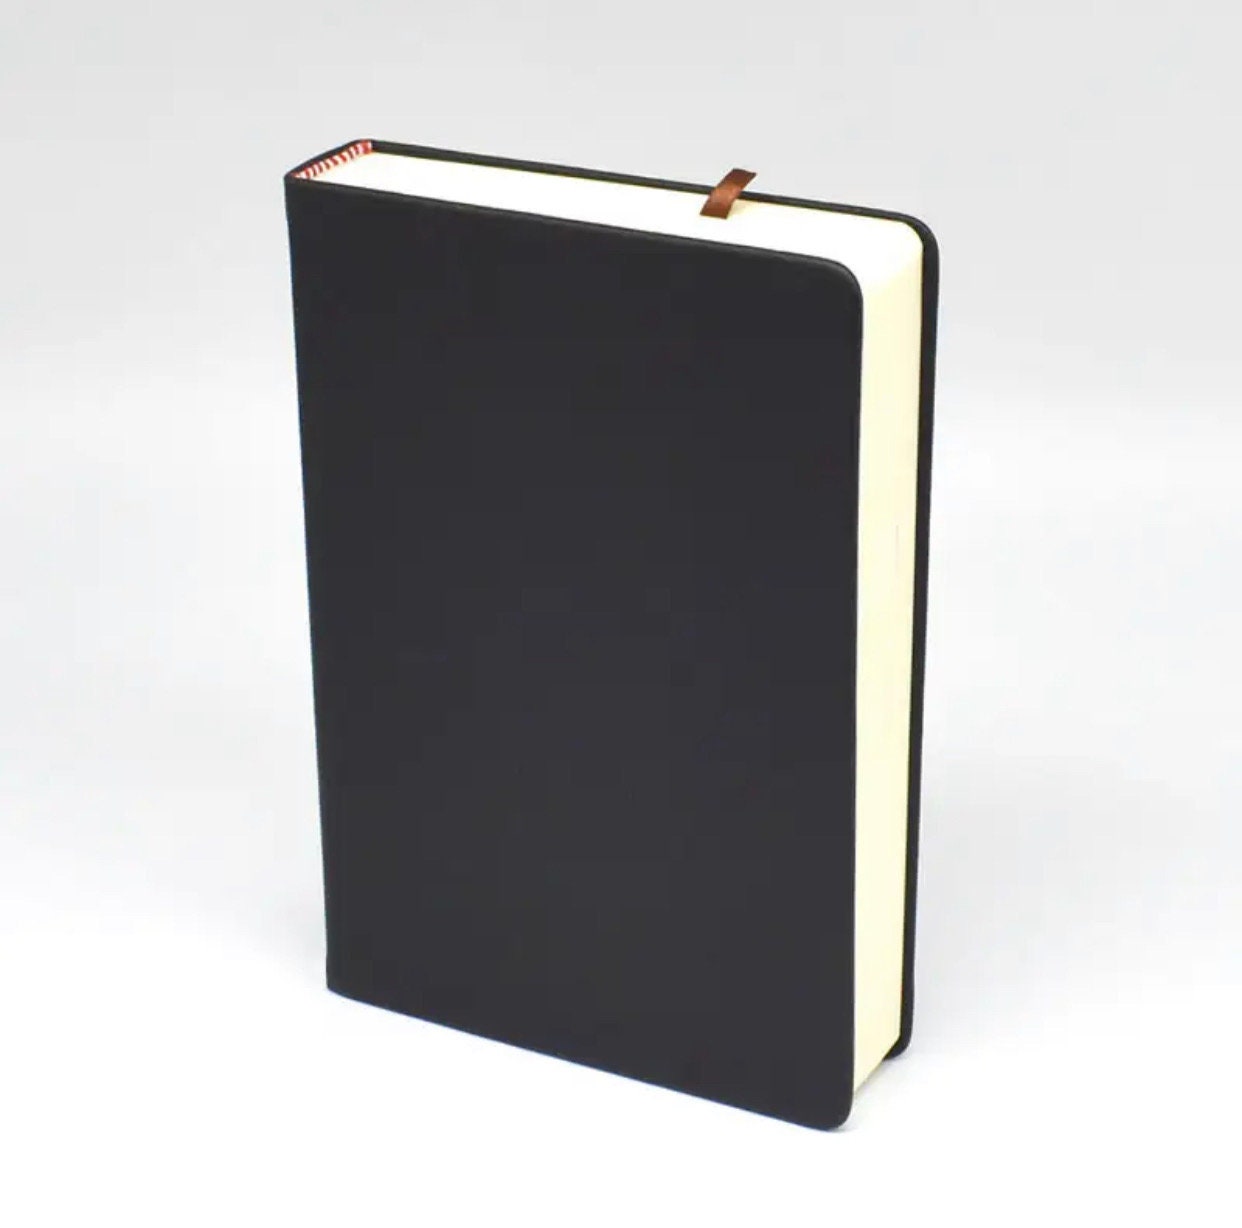 White Hardcover Blank Book For Creating Custom Design Books, 11 x 8-1/2  Inch With 14 Total Blank Pages, Create Own Art And Craft Book Design